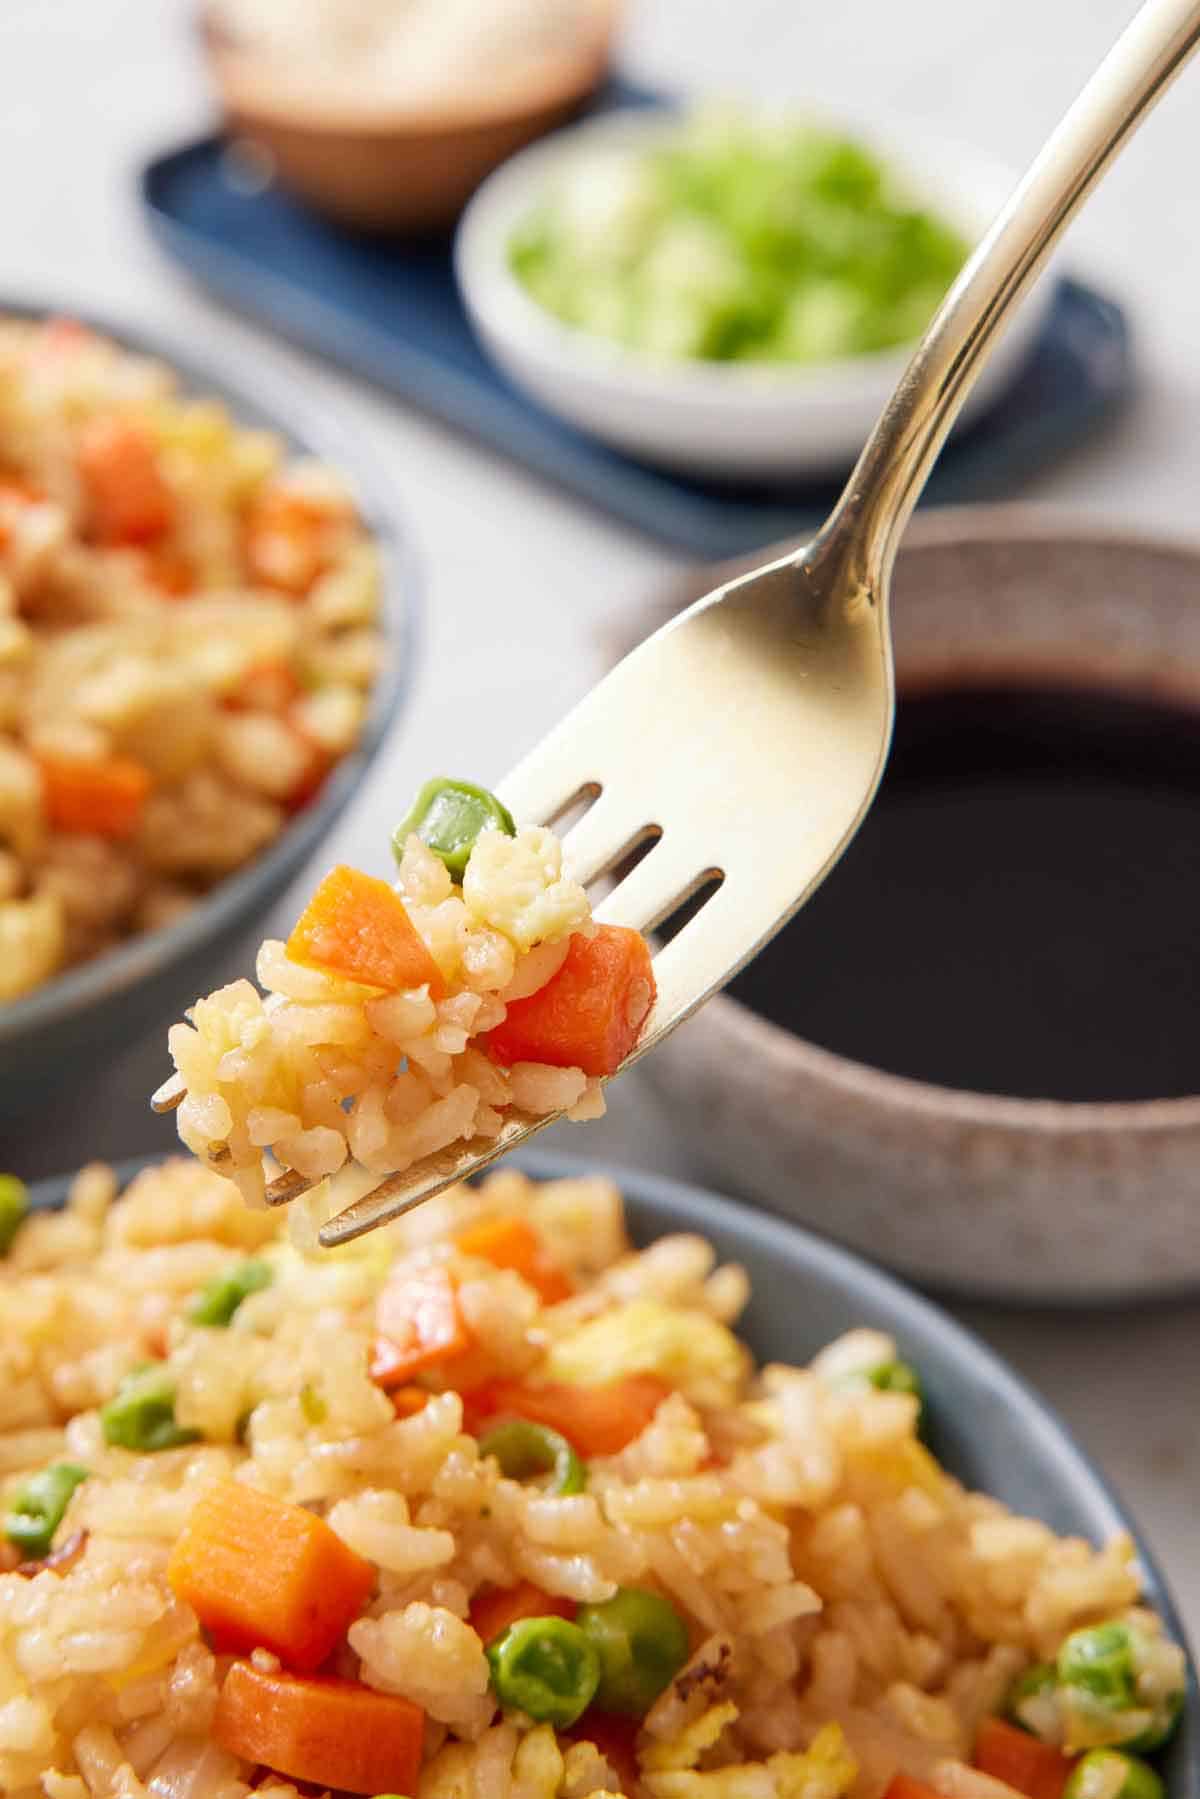 A fork lifting up fried rice from a bowl. Sauce and garnishes out of focus in the background.